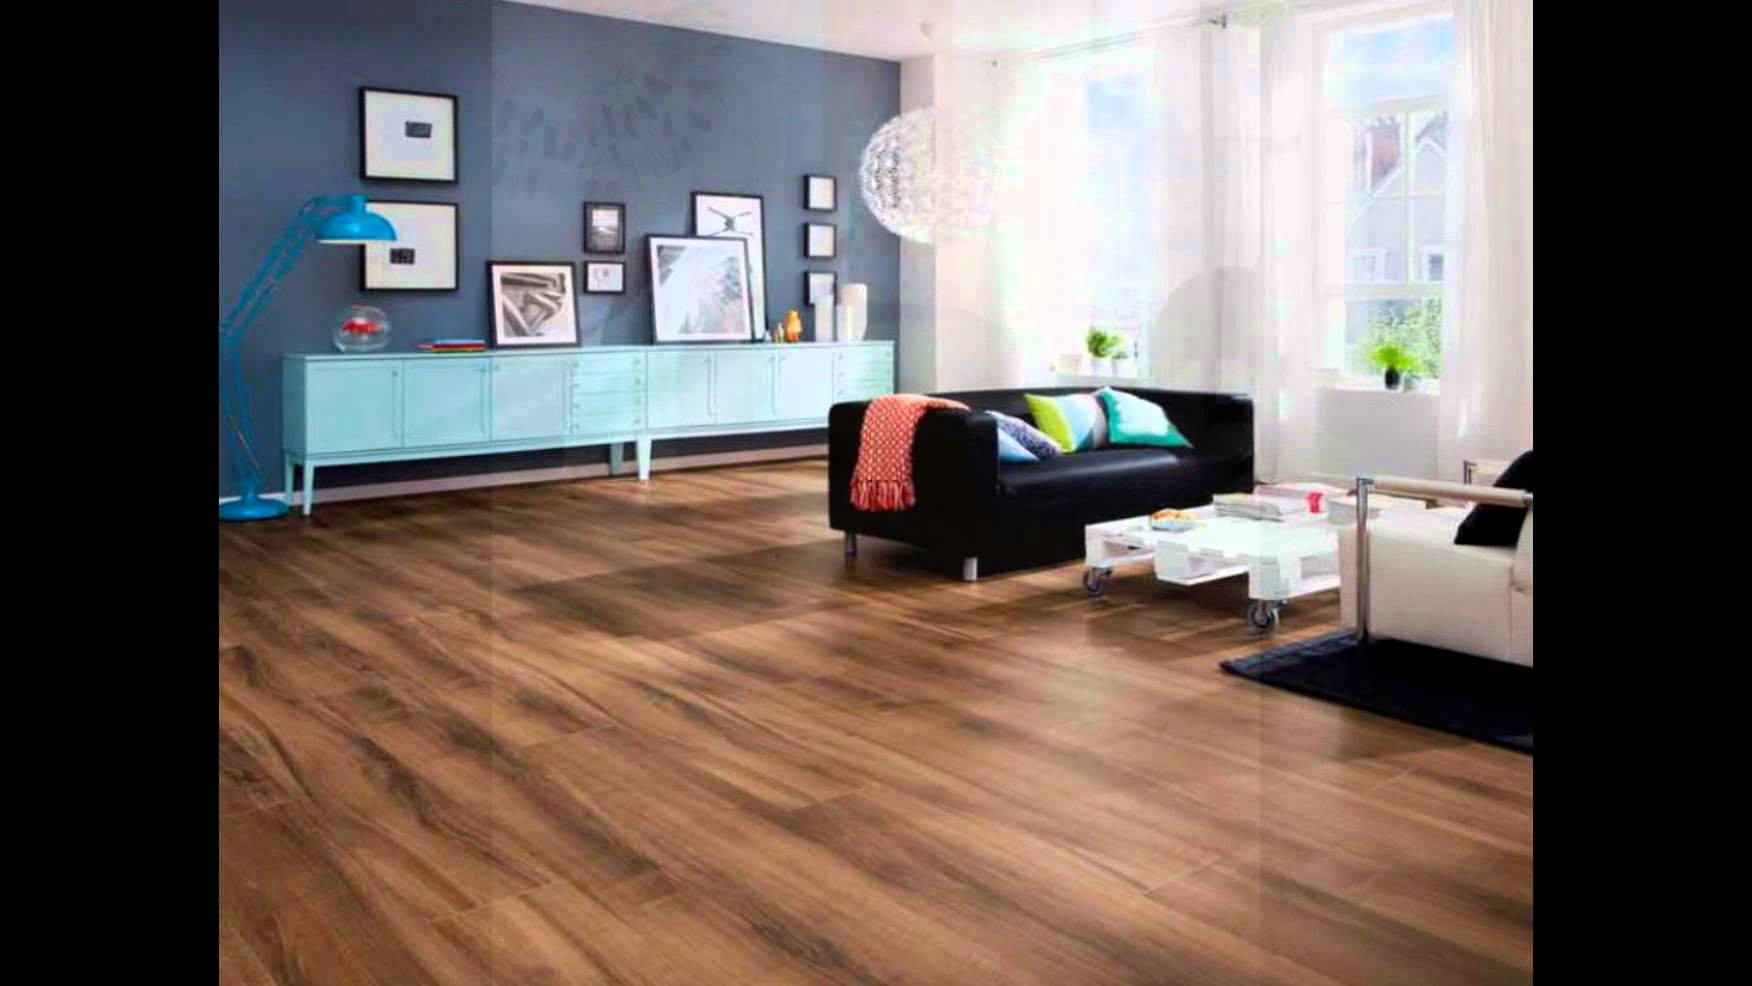 25 Stunning Modern Hardwood Flooring Ideas 2024 free download modern hardwood flooring ideas of living room engaging best ideas about bathroomloor tiles on small intended for full size of good looking living room ceramic tile flooring ideasod grain in 